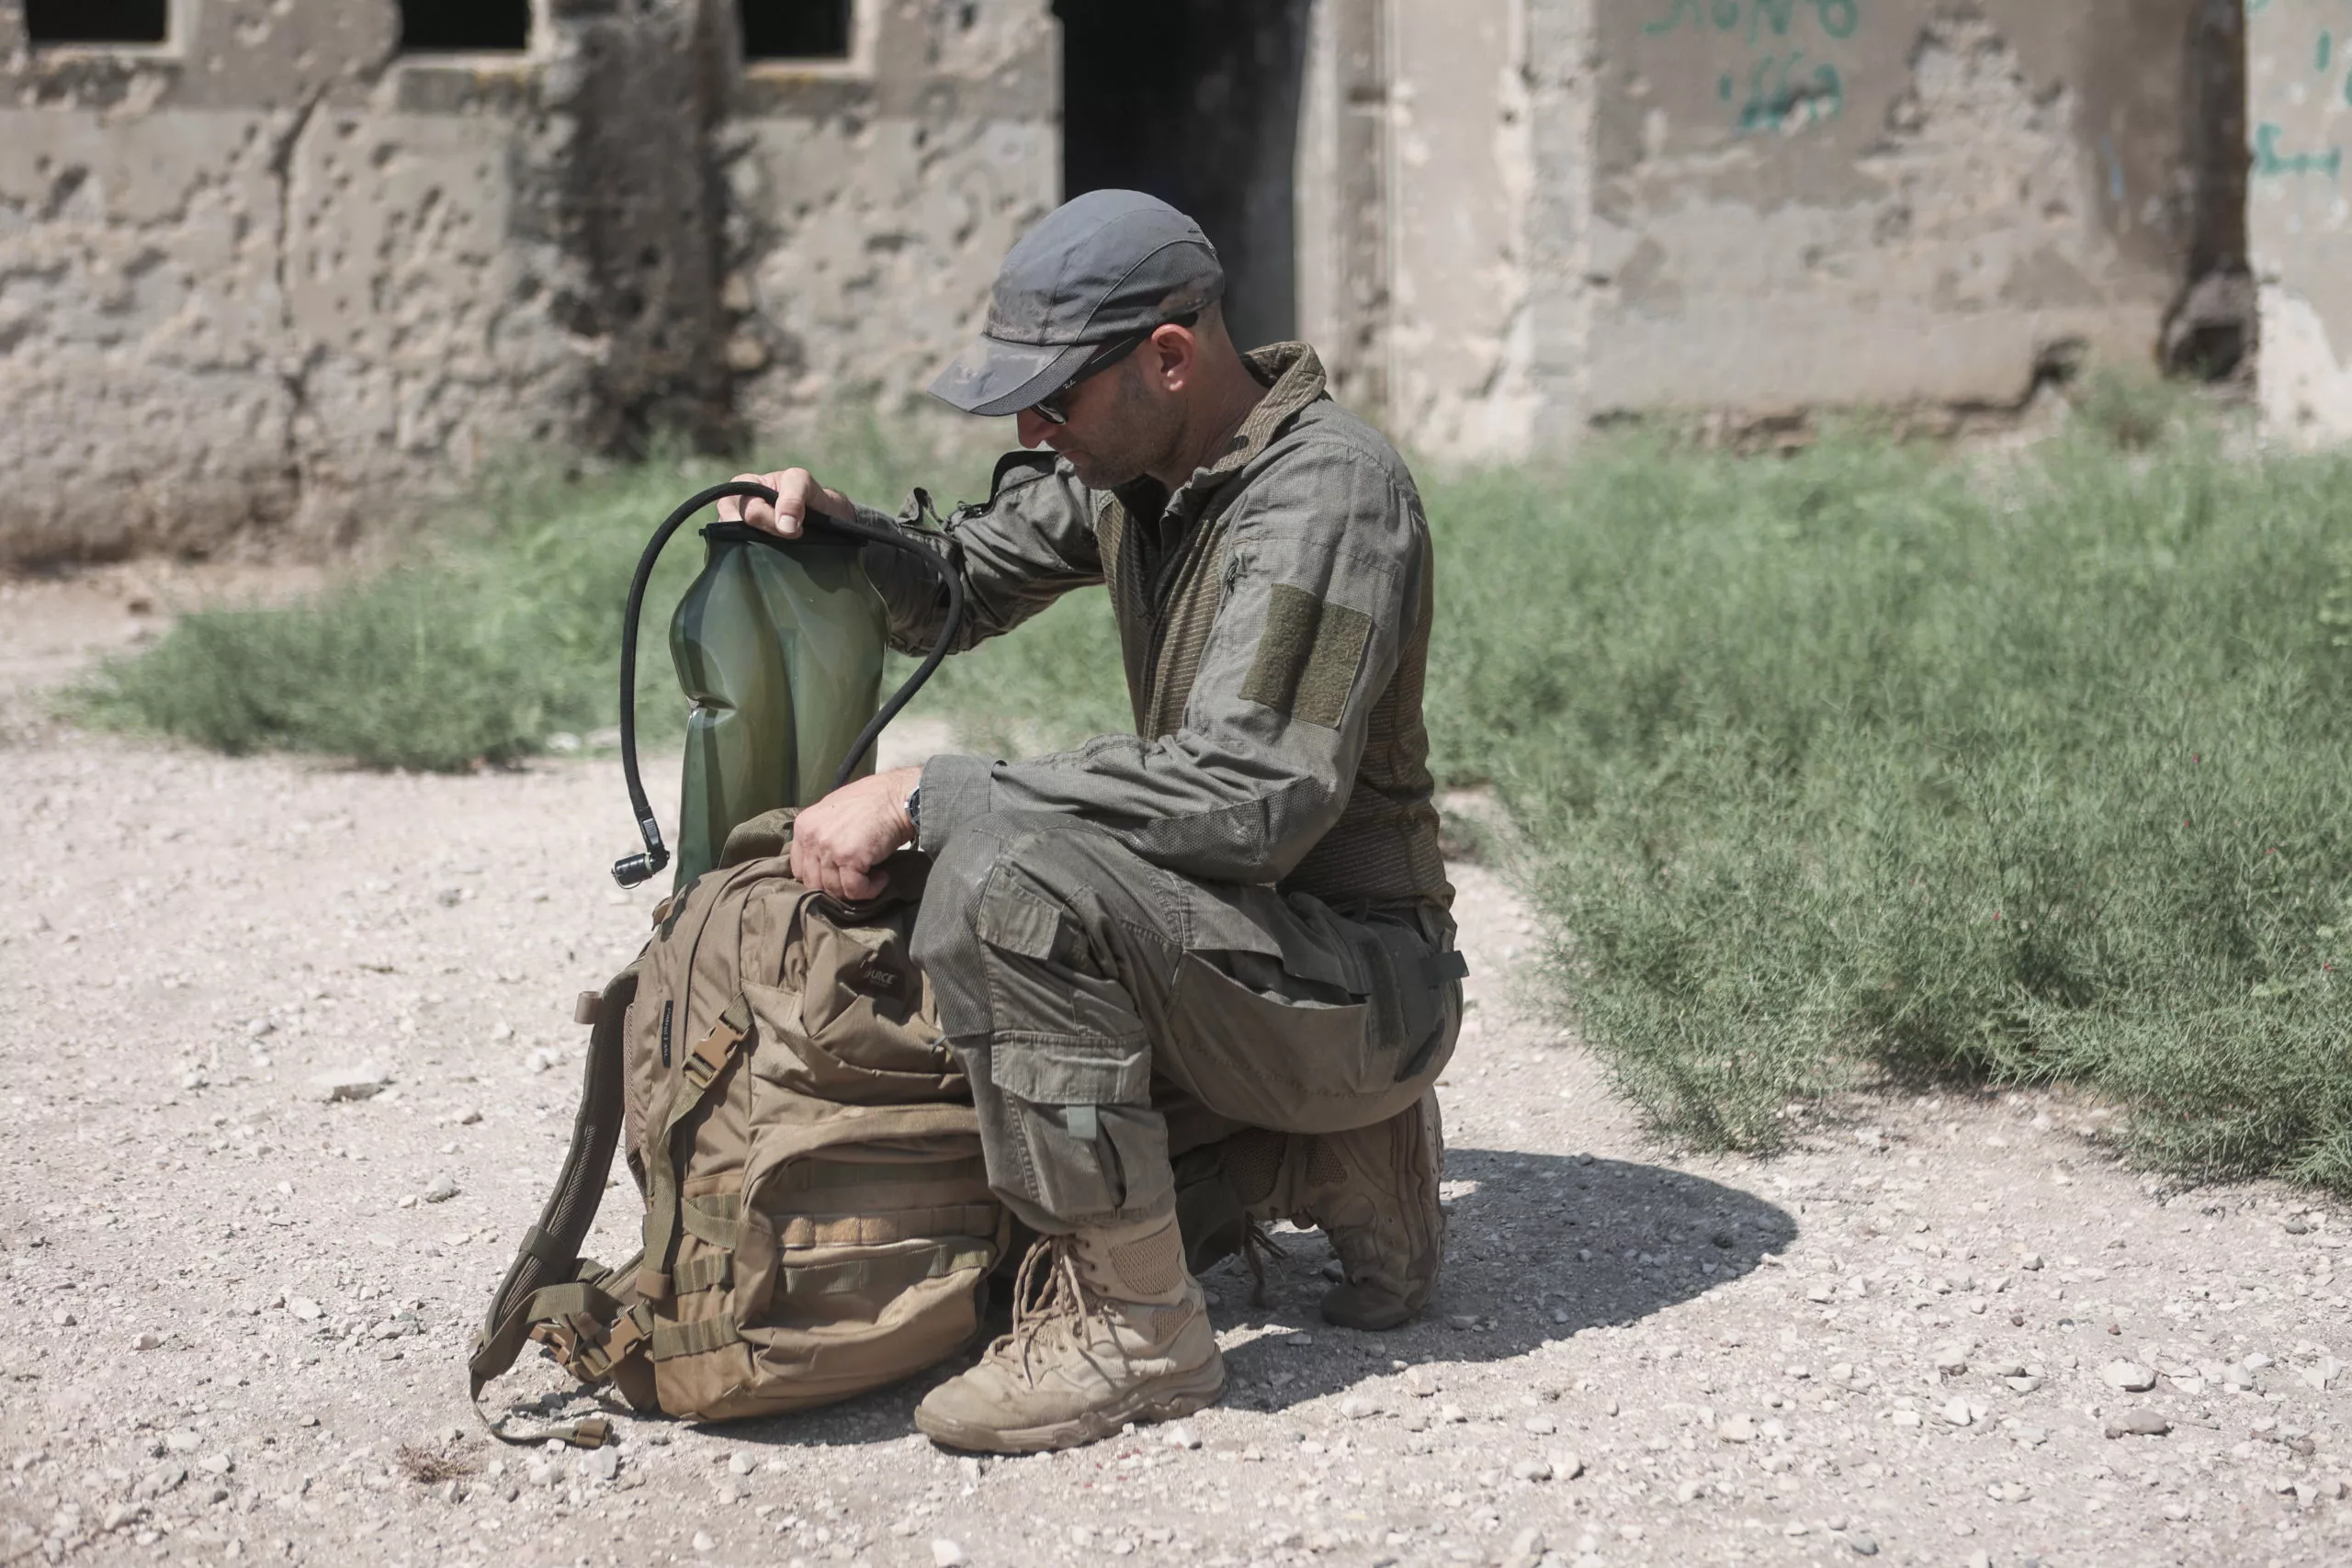 a soldier pulling out hydration bladder from a bag